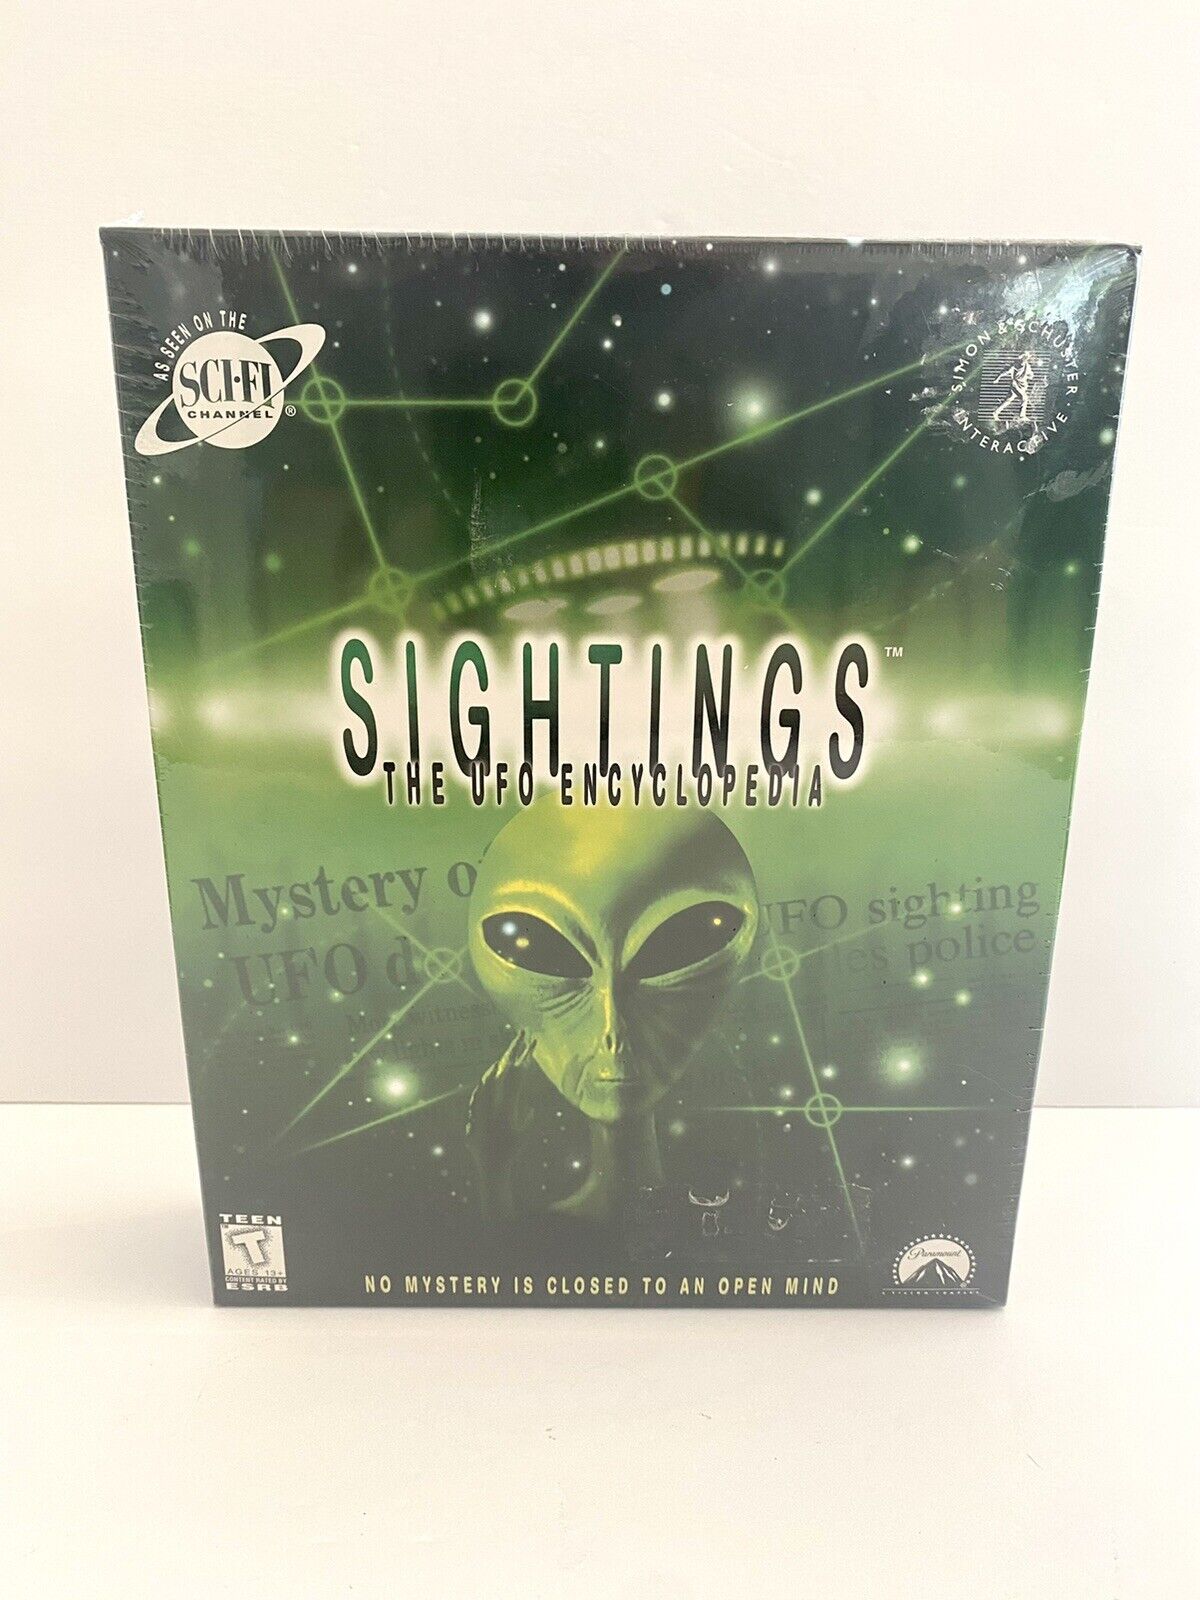 Sightings The UFO Encyclopedia PC Vintage Software CD New Sealed